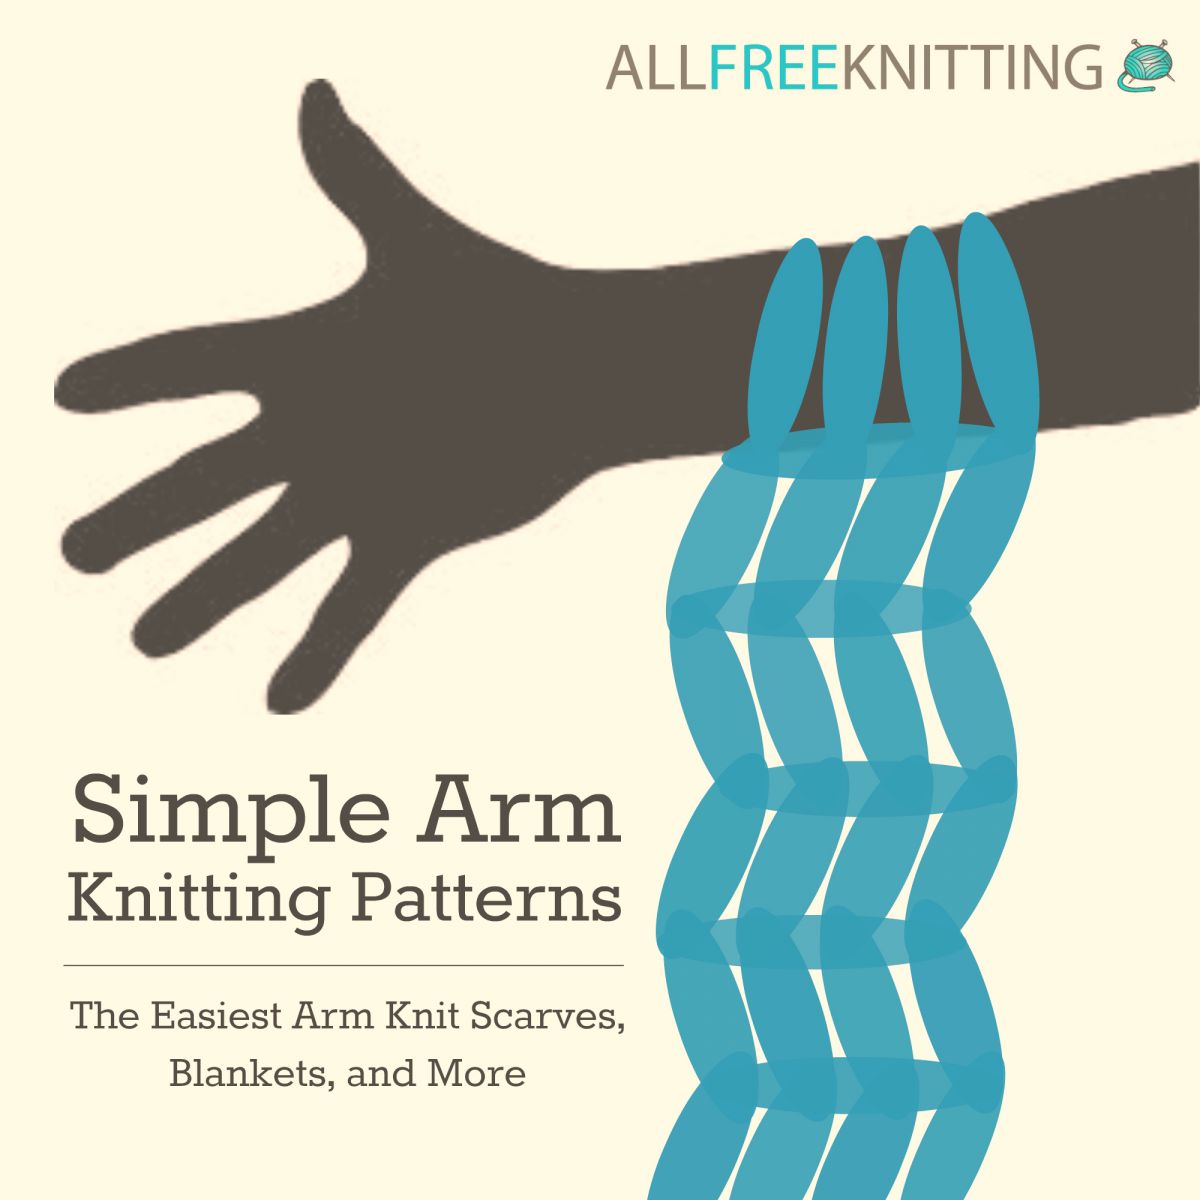 Simple Arm Knitting Patterns